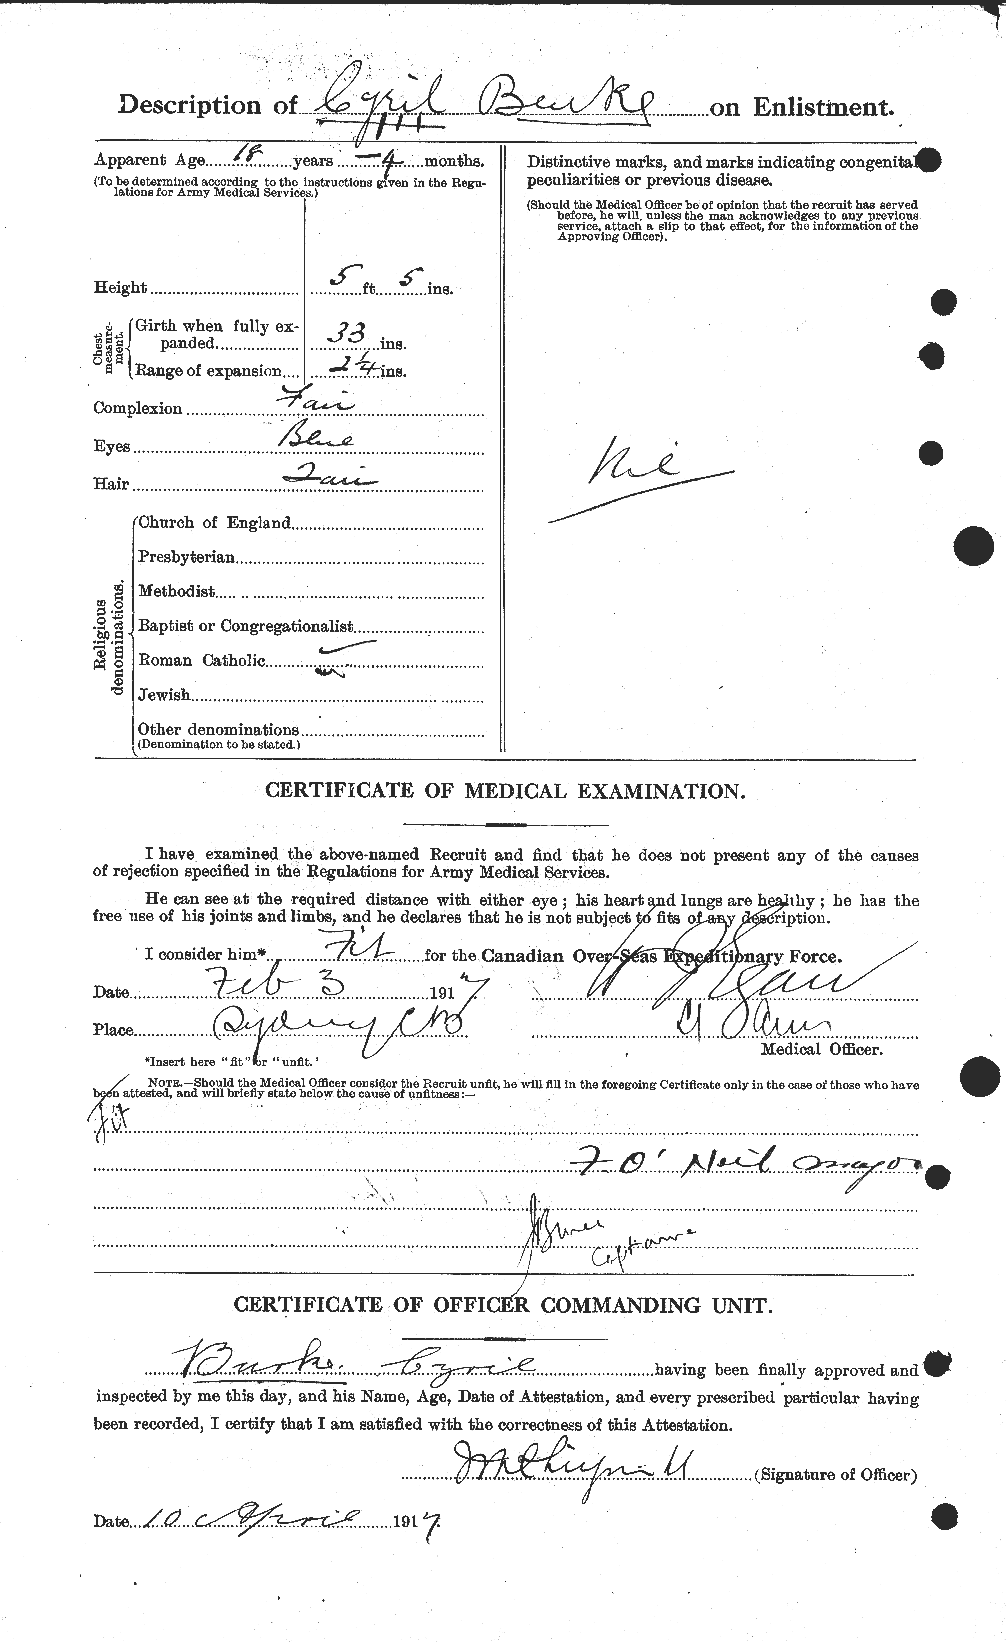 Personnel Records of the First World War - CEF 272396b